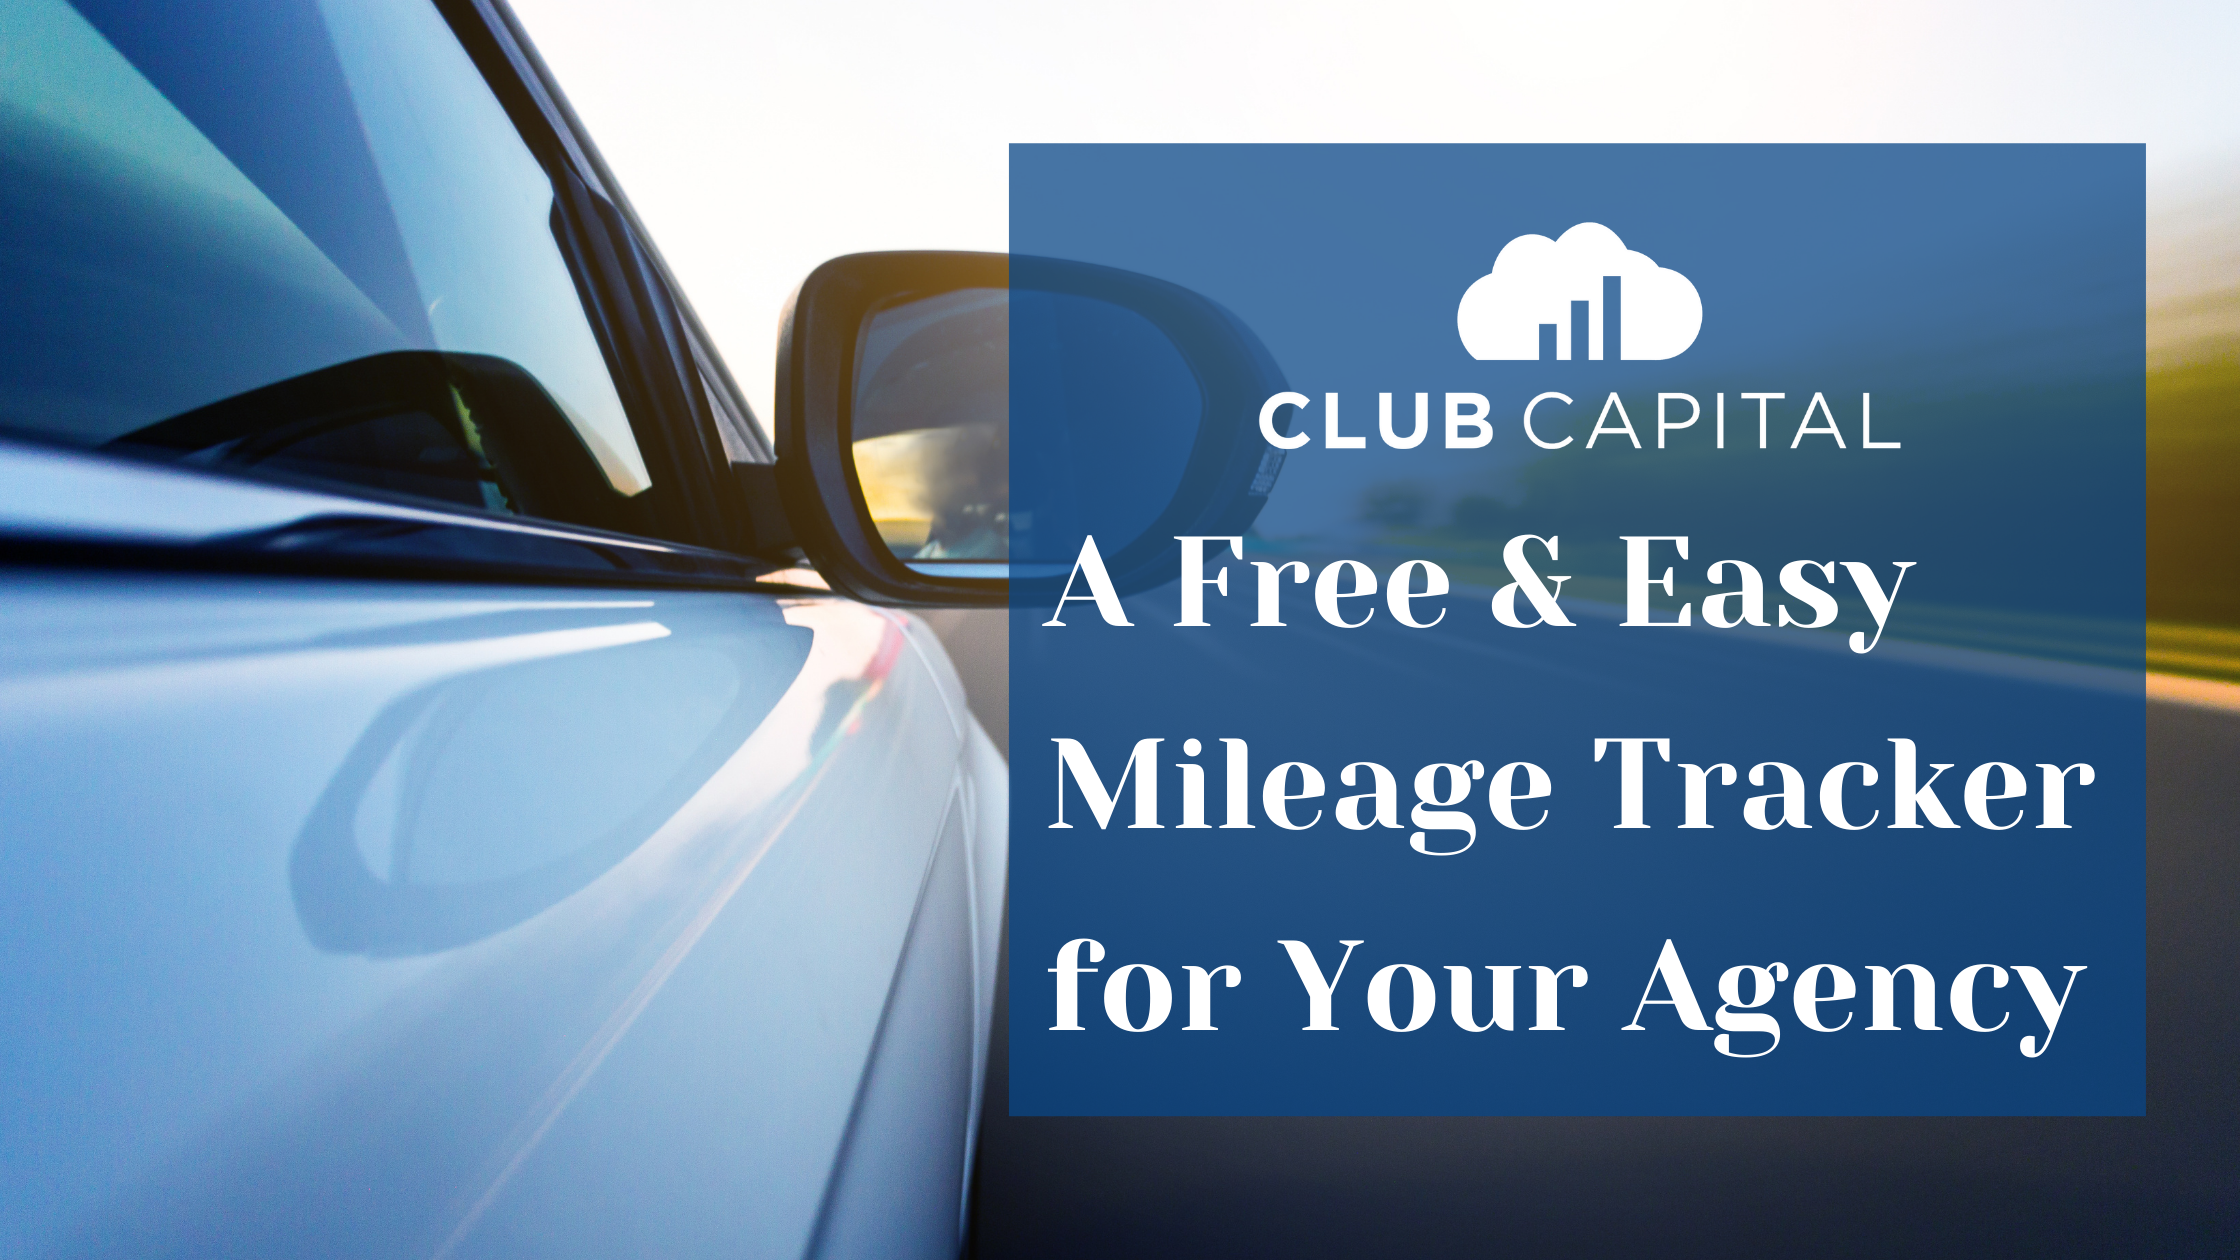 Our Club Capital app makes tracking your mileage simple and easy. You can run your payroll on the go, view your financials, and track your mileage — all from your phone.